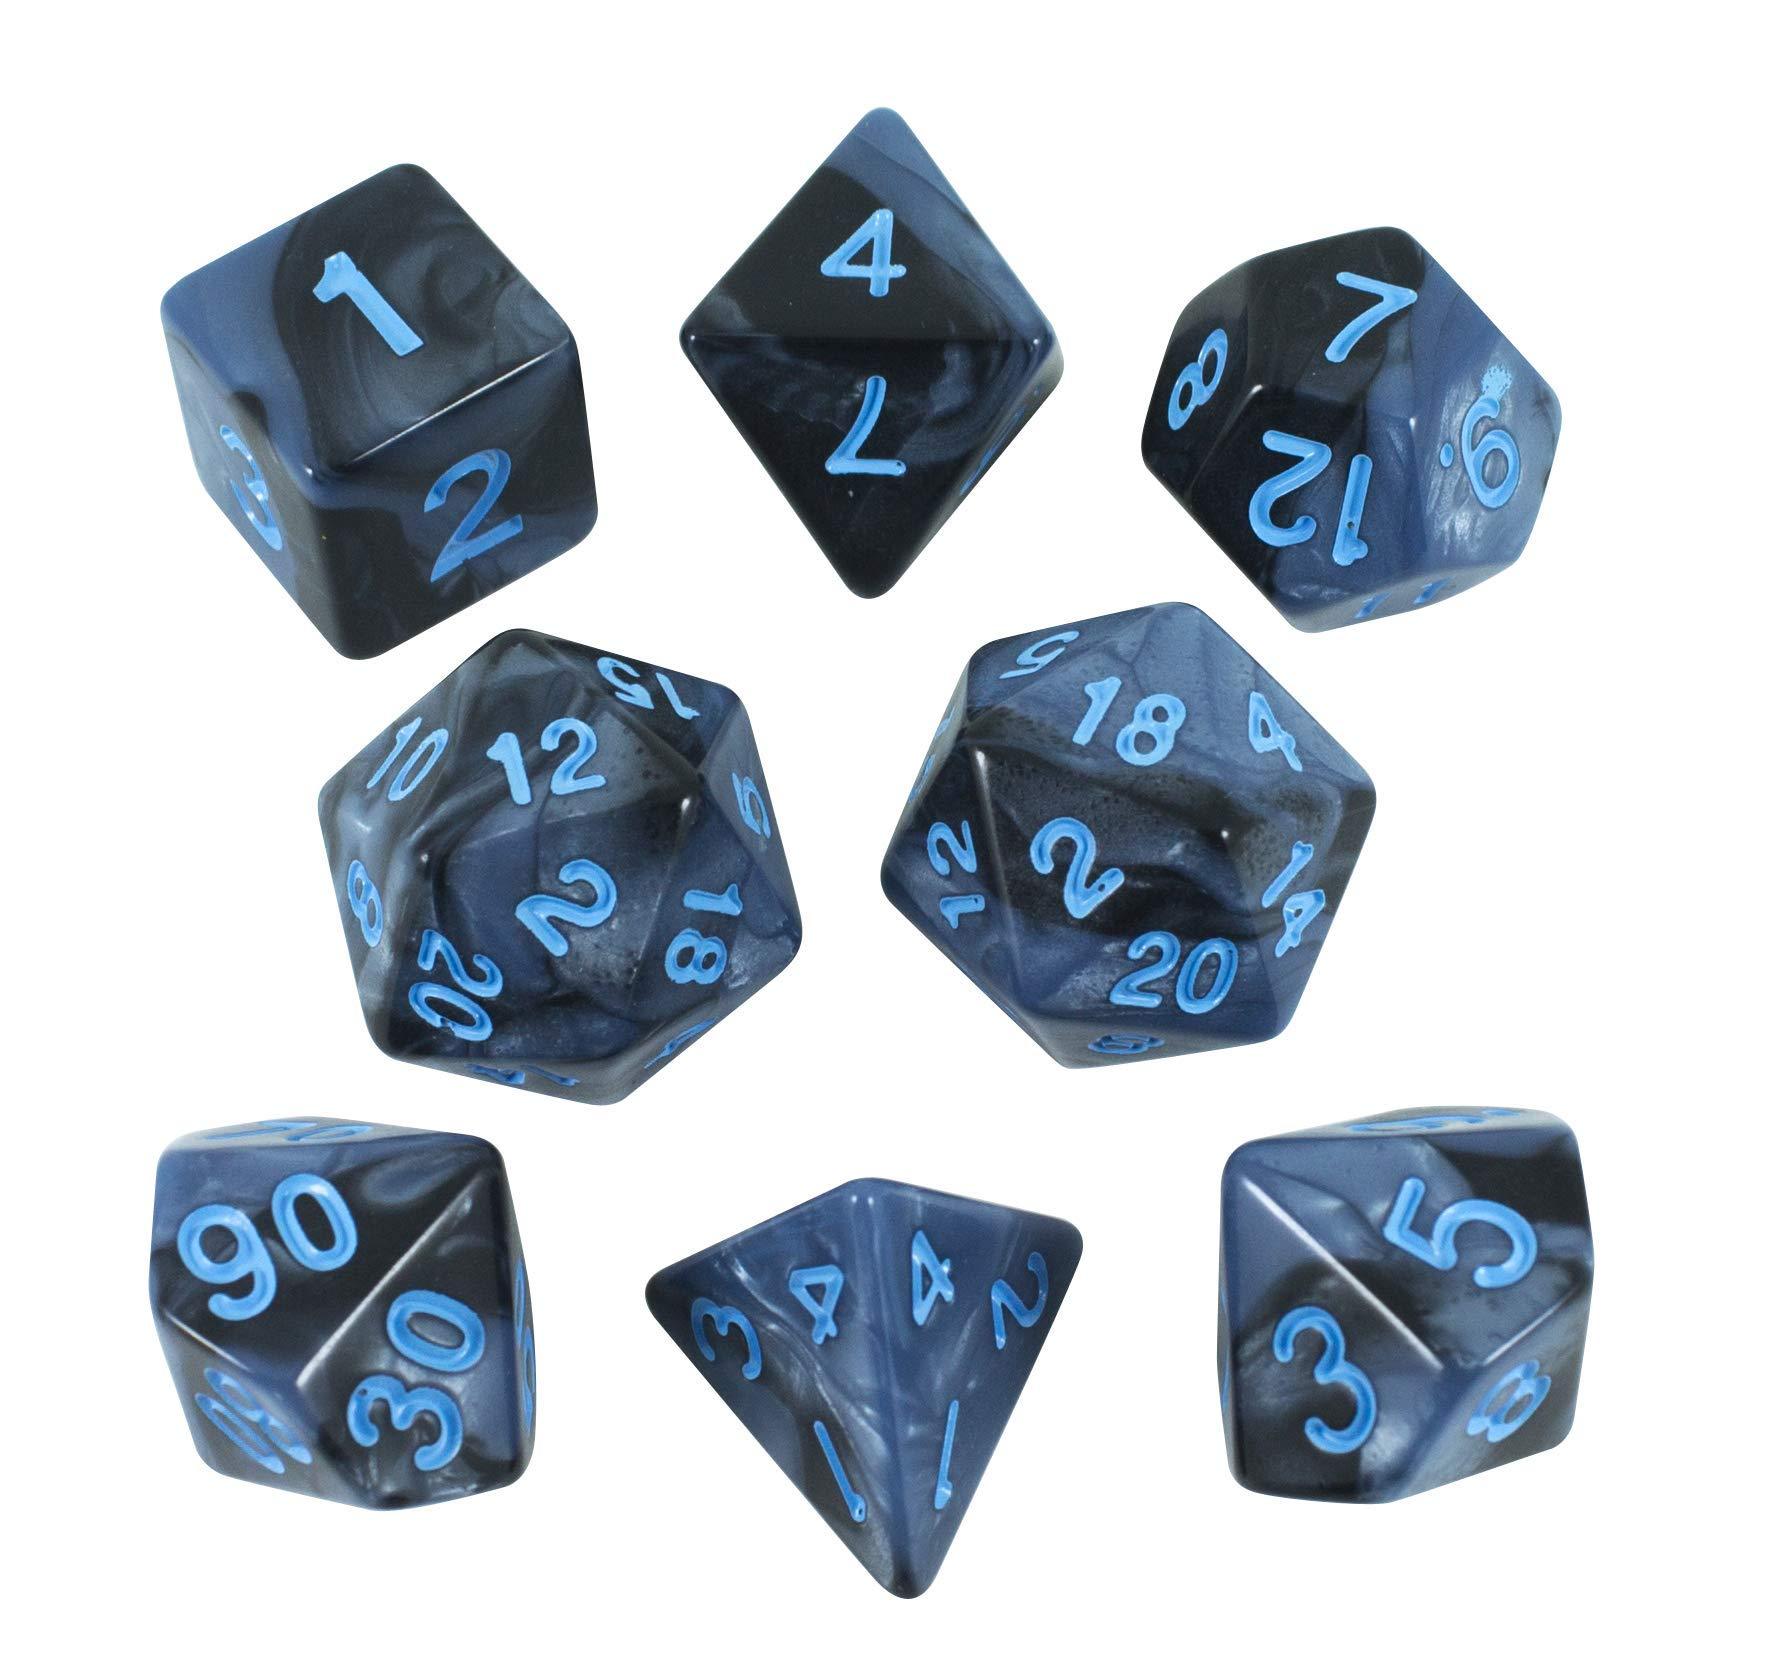 'Storm Lord' Grey and Blue Dice - Expanded Polyhedral Set With Extra D20 - Paladin Roleplaying